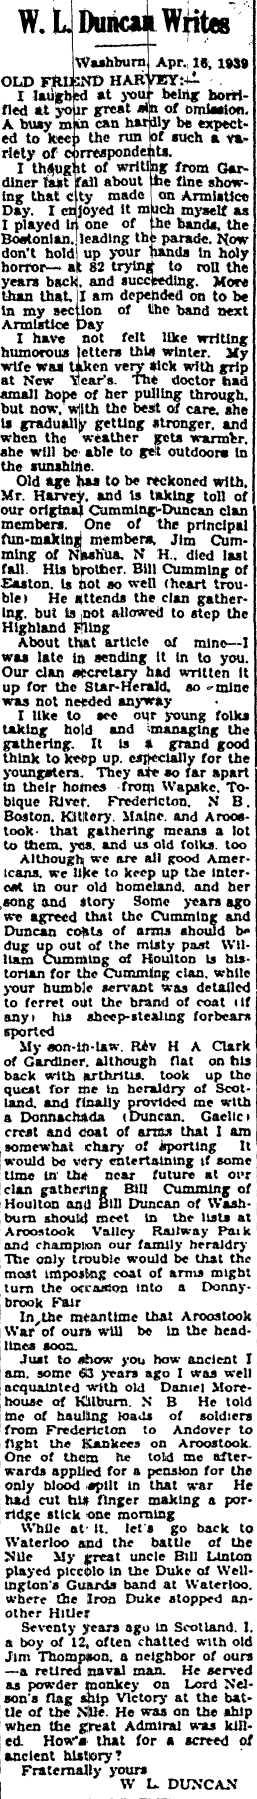 WLDuncan writes Page 3 of Fort Fairfiled Review published inFort Fairfield Maine Wednesday, May 17th , 1939